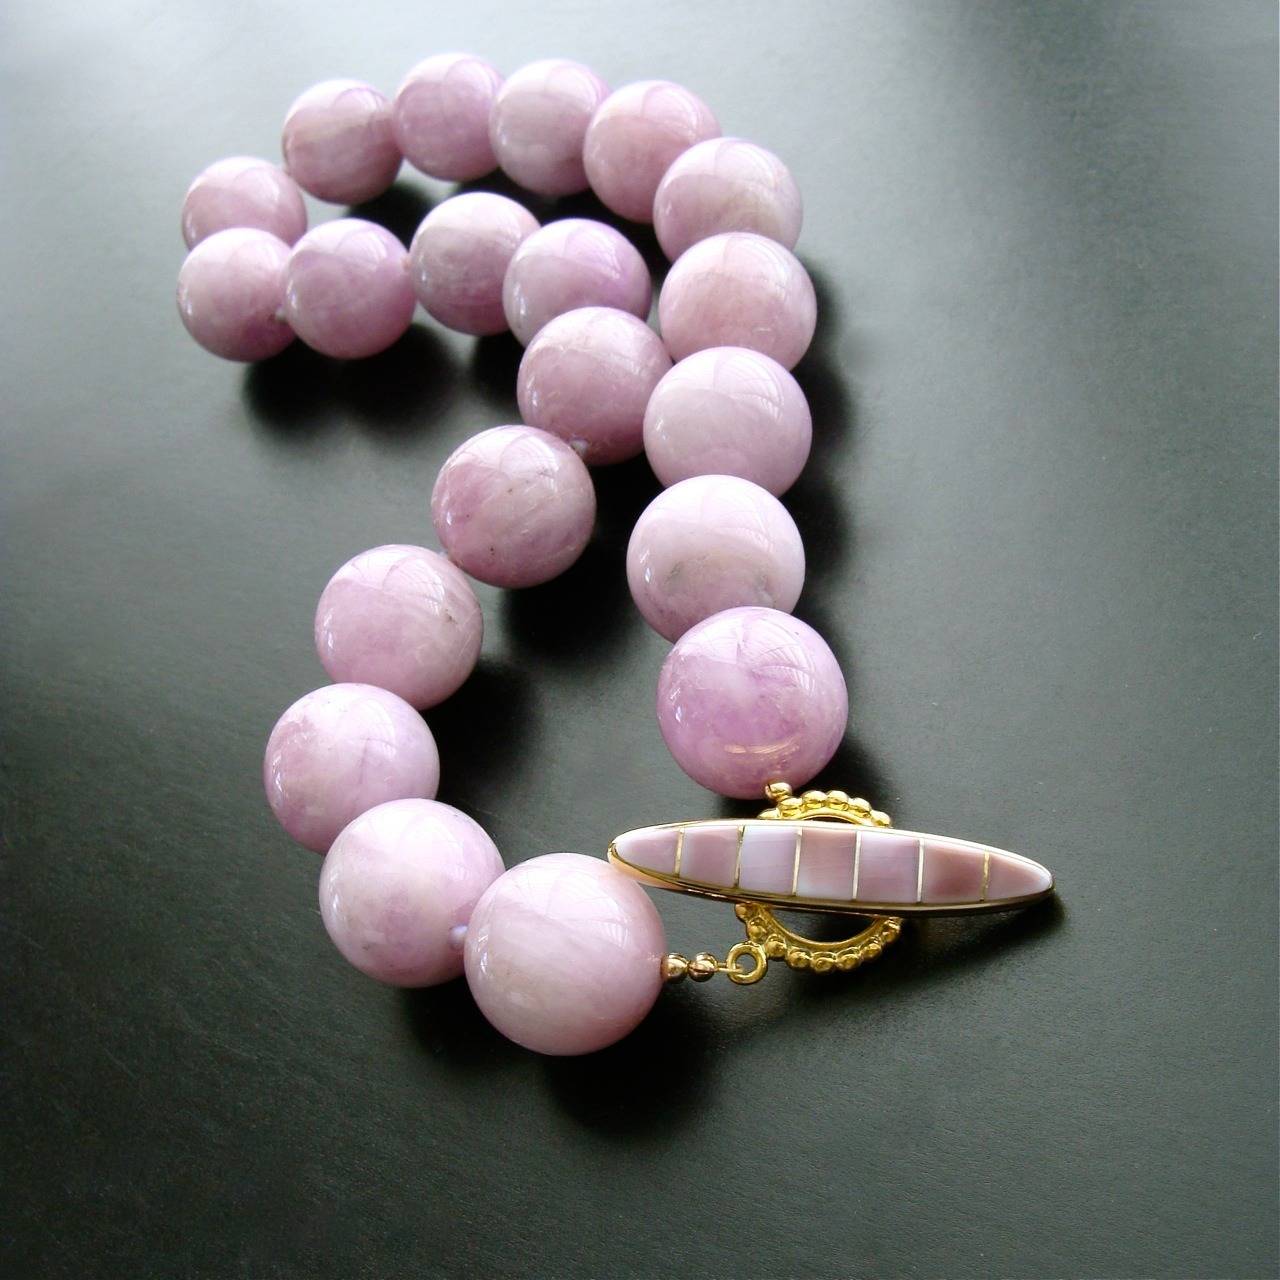 Kunzite gumball sized beads in a sweet orchid confectionary color, create a modern and feminine choker necklace.  The untamed nature of these stunning beads is a sophisticated juxtaposition when paired with the delicate lilac inlay shell gold